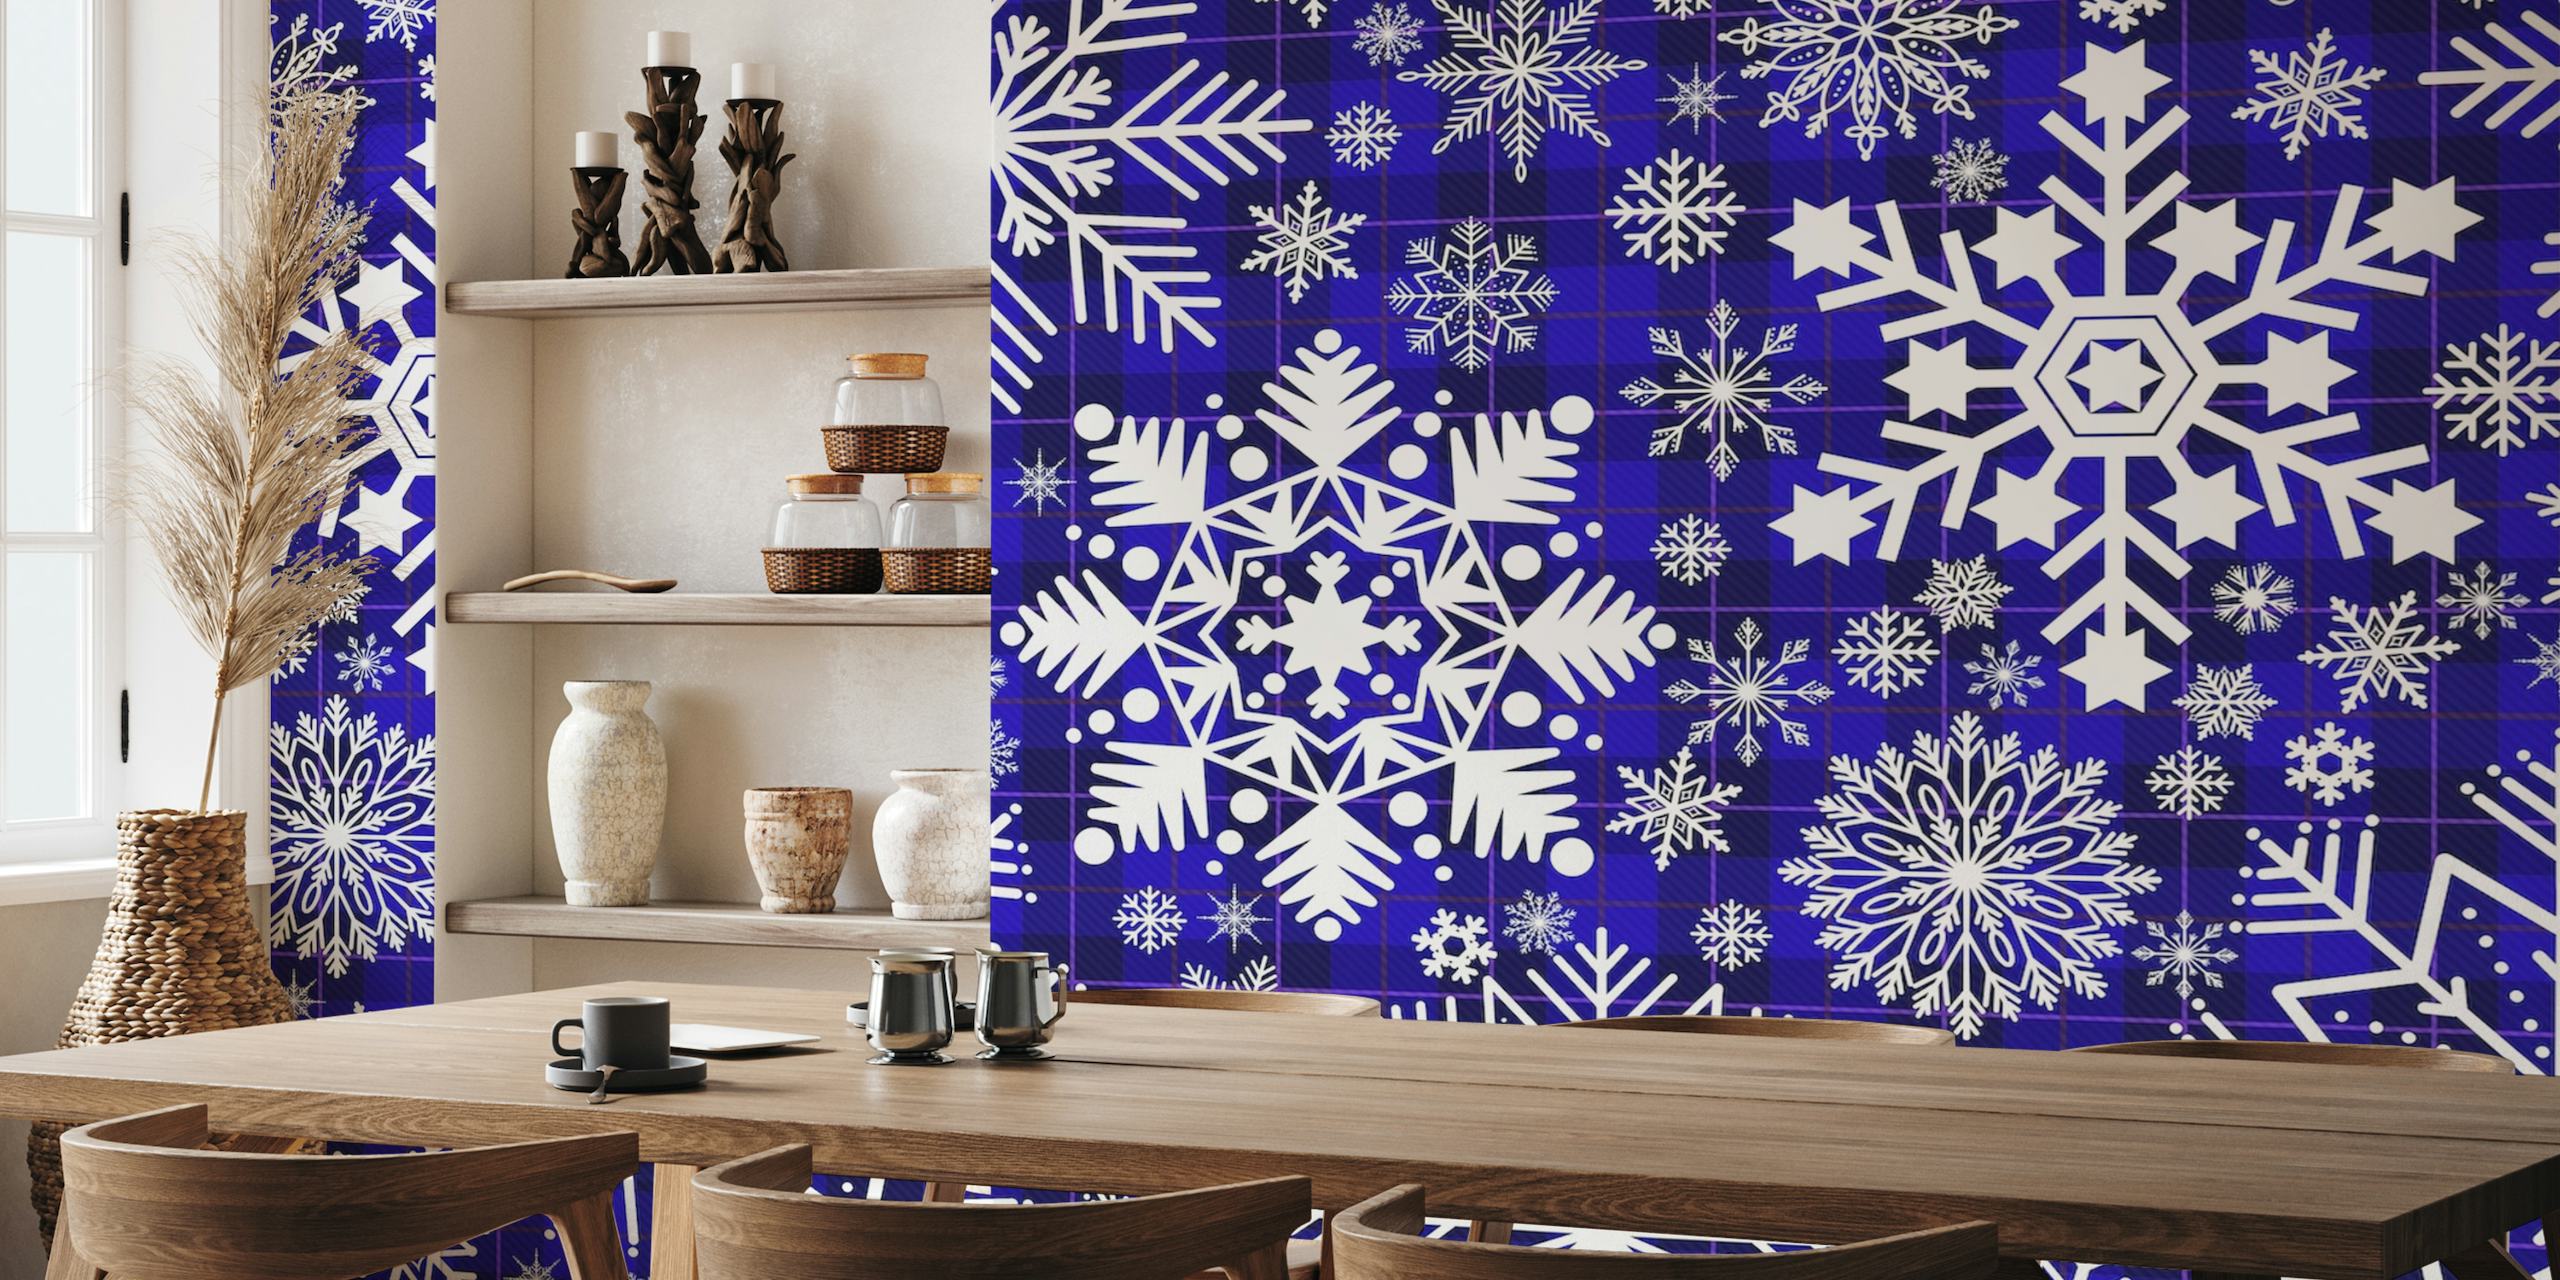 Intricate white snowflakes pattern on a deep blue tartan background wall mural